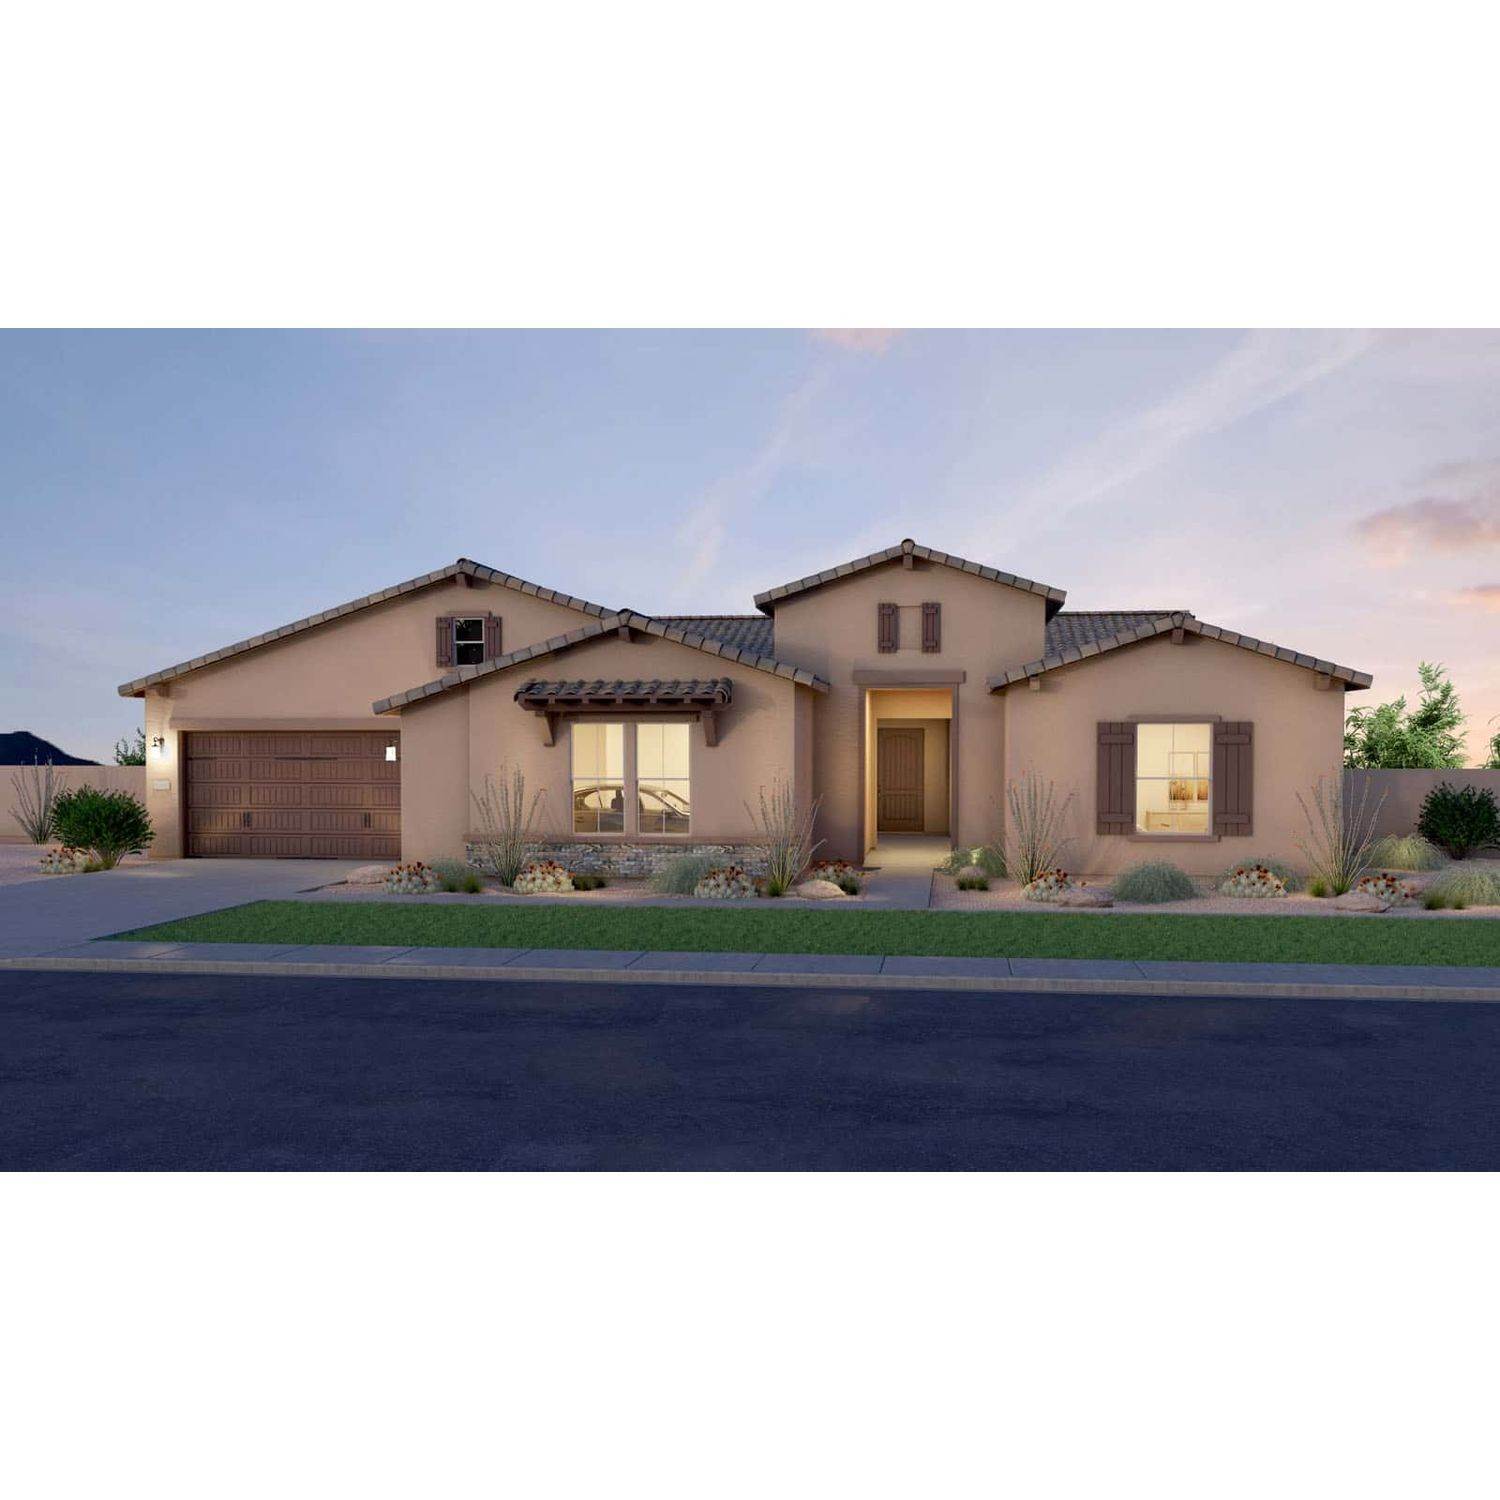 Single Family for Sale at Goodyear, AZ 85395